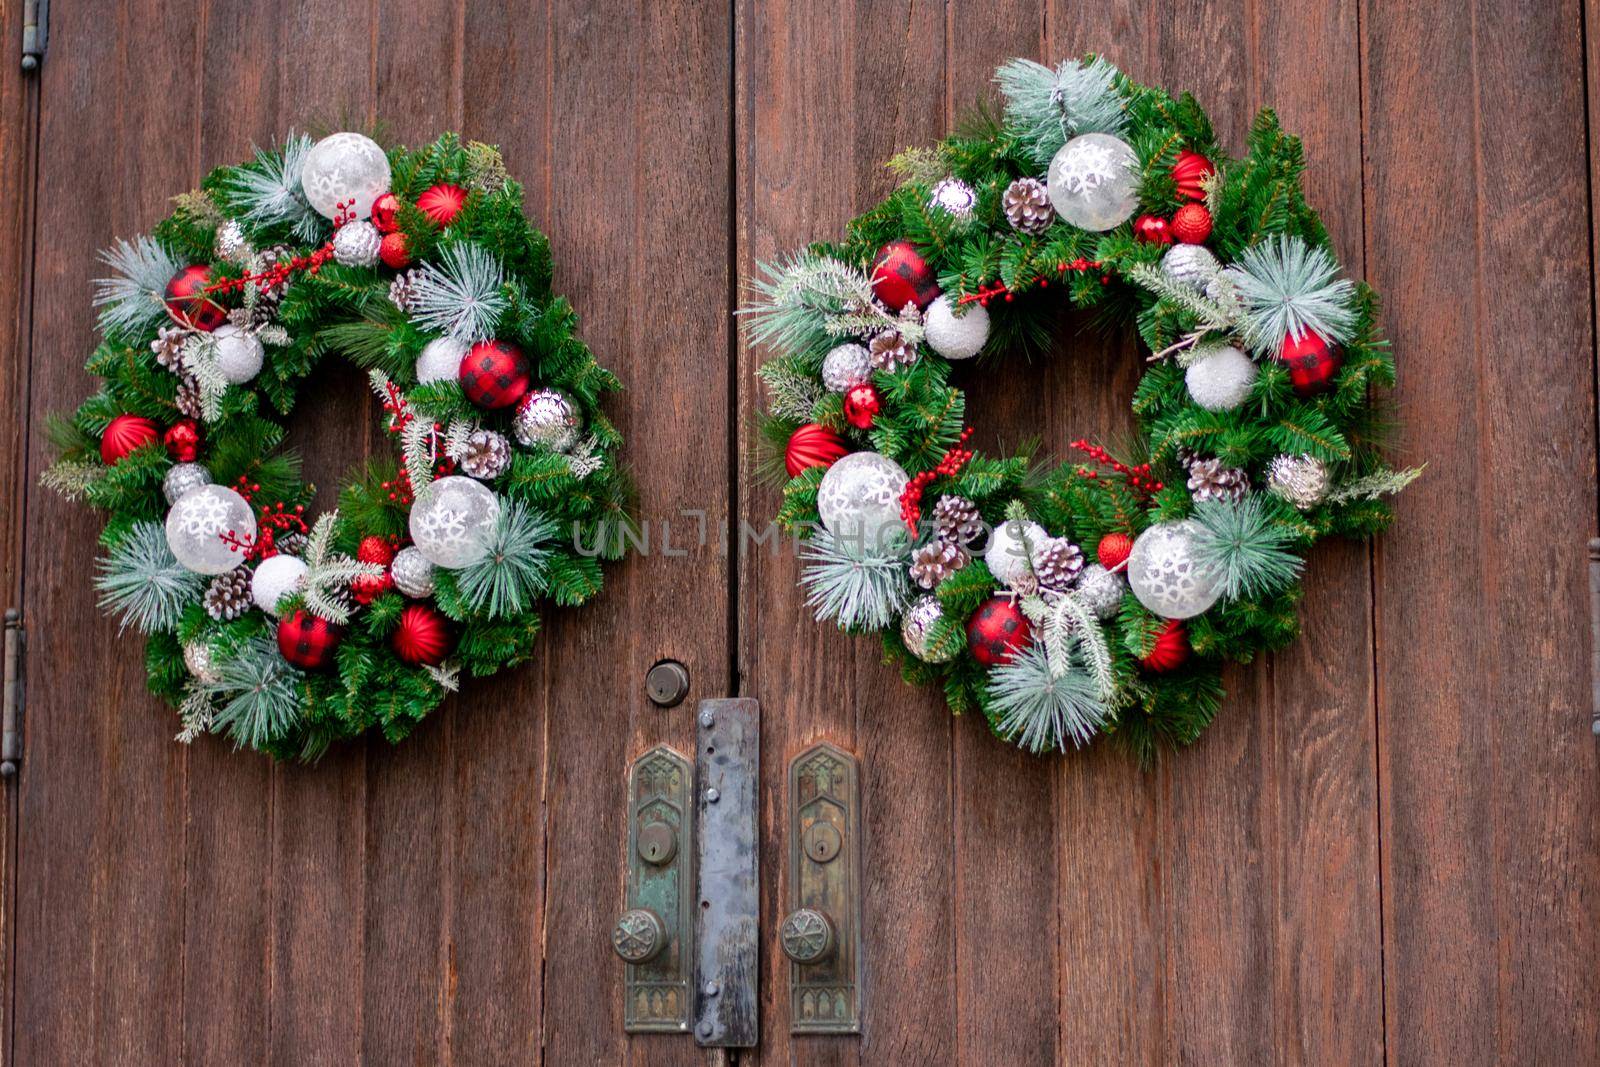 Two Christmas Wreathes on a Wooden Door by bju12290